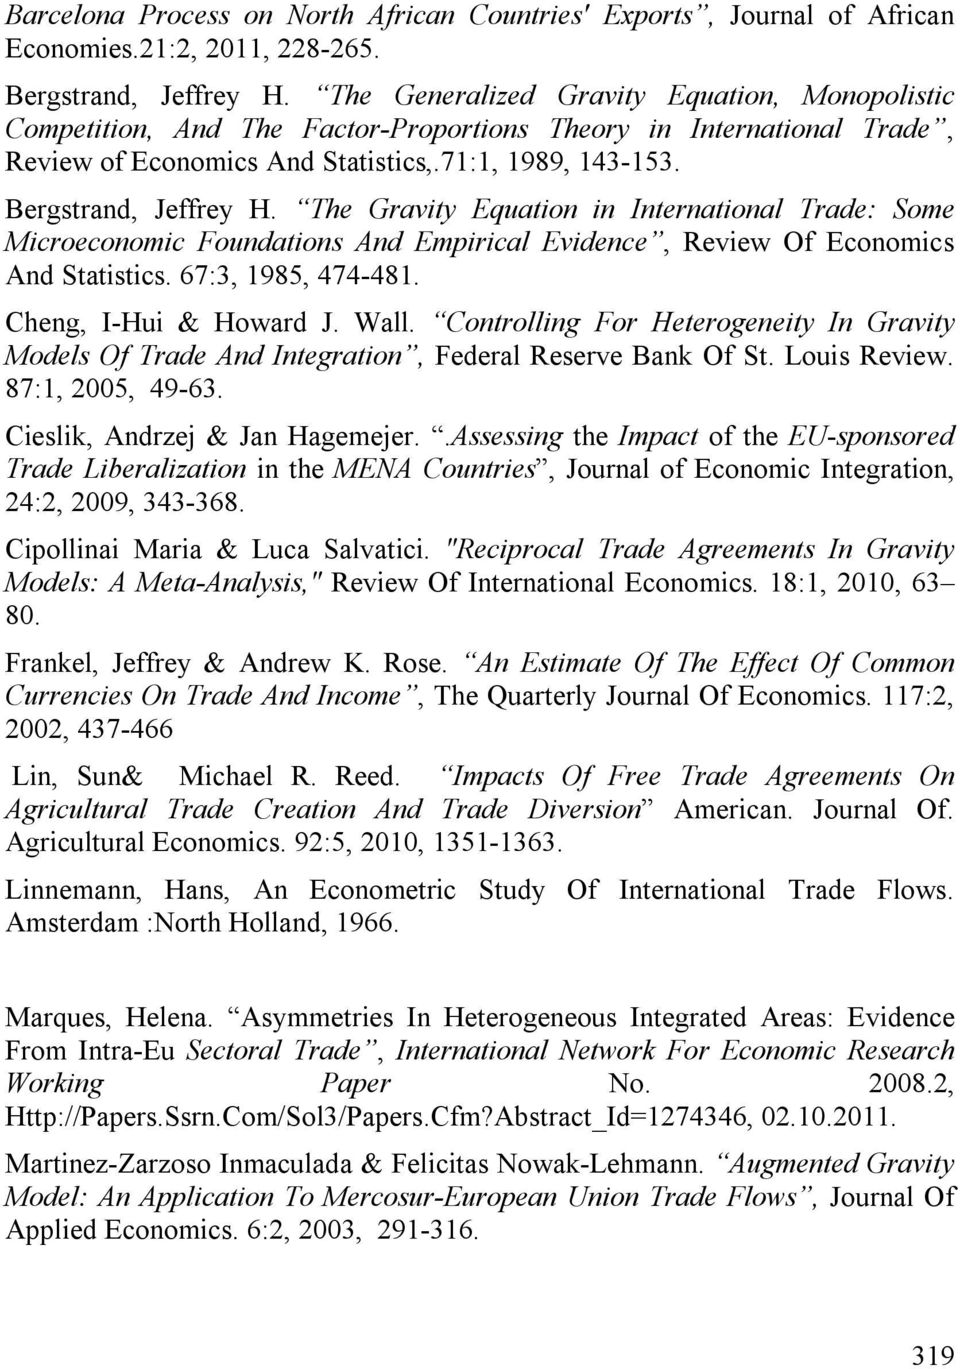 The Gravity Equation in International Trade: Some Microeconomic Foundations And Empirical Evidence, Review Of Economics And Statistics. 67:3, 1985, 474-481. Cheng, I-Hui & Howard J. Wall.